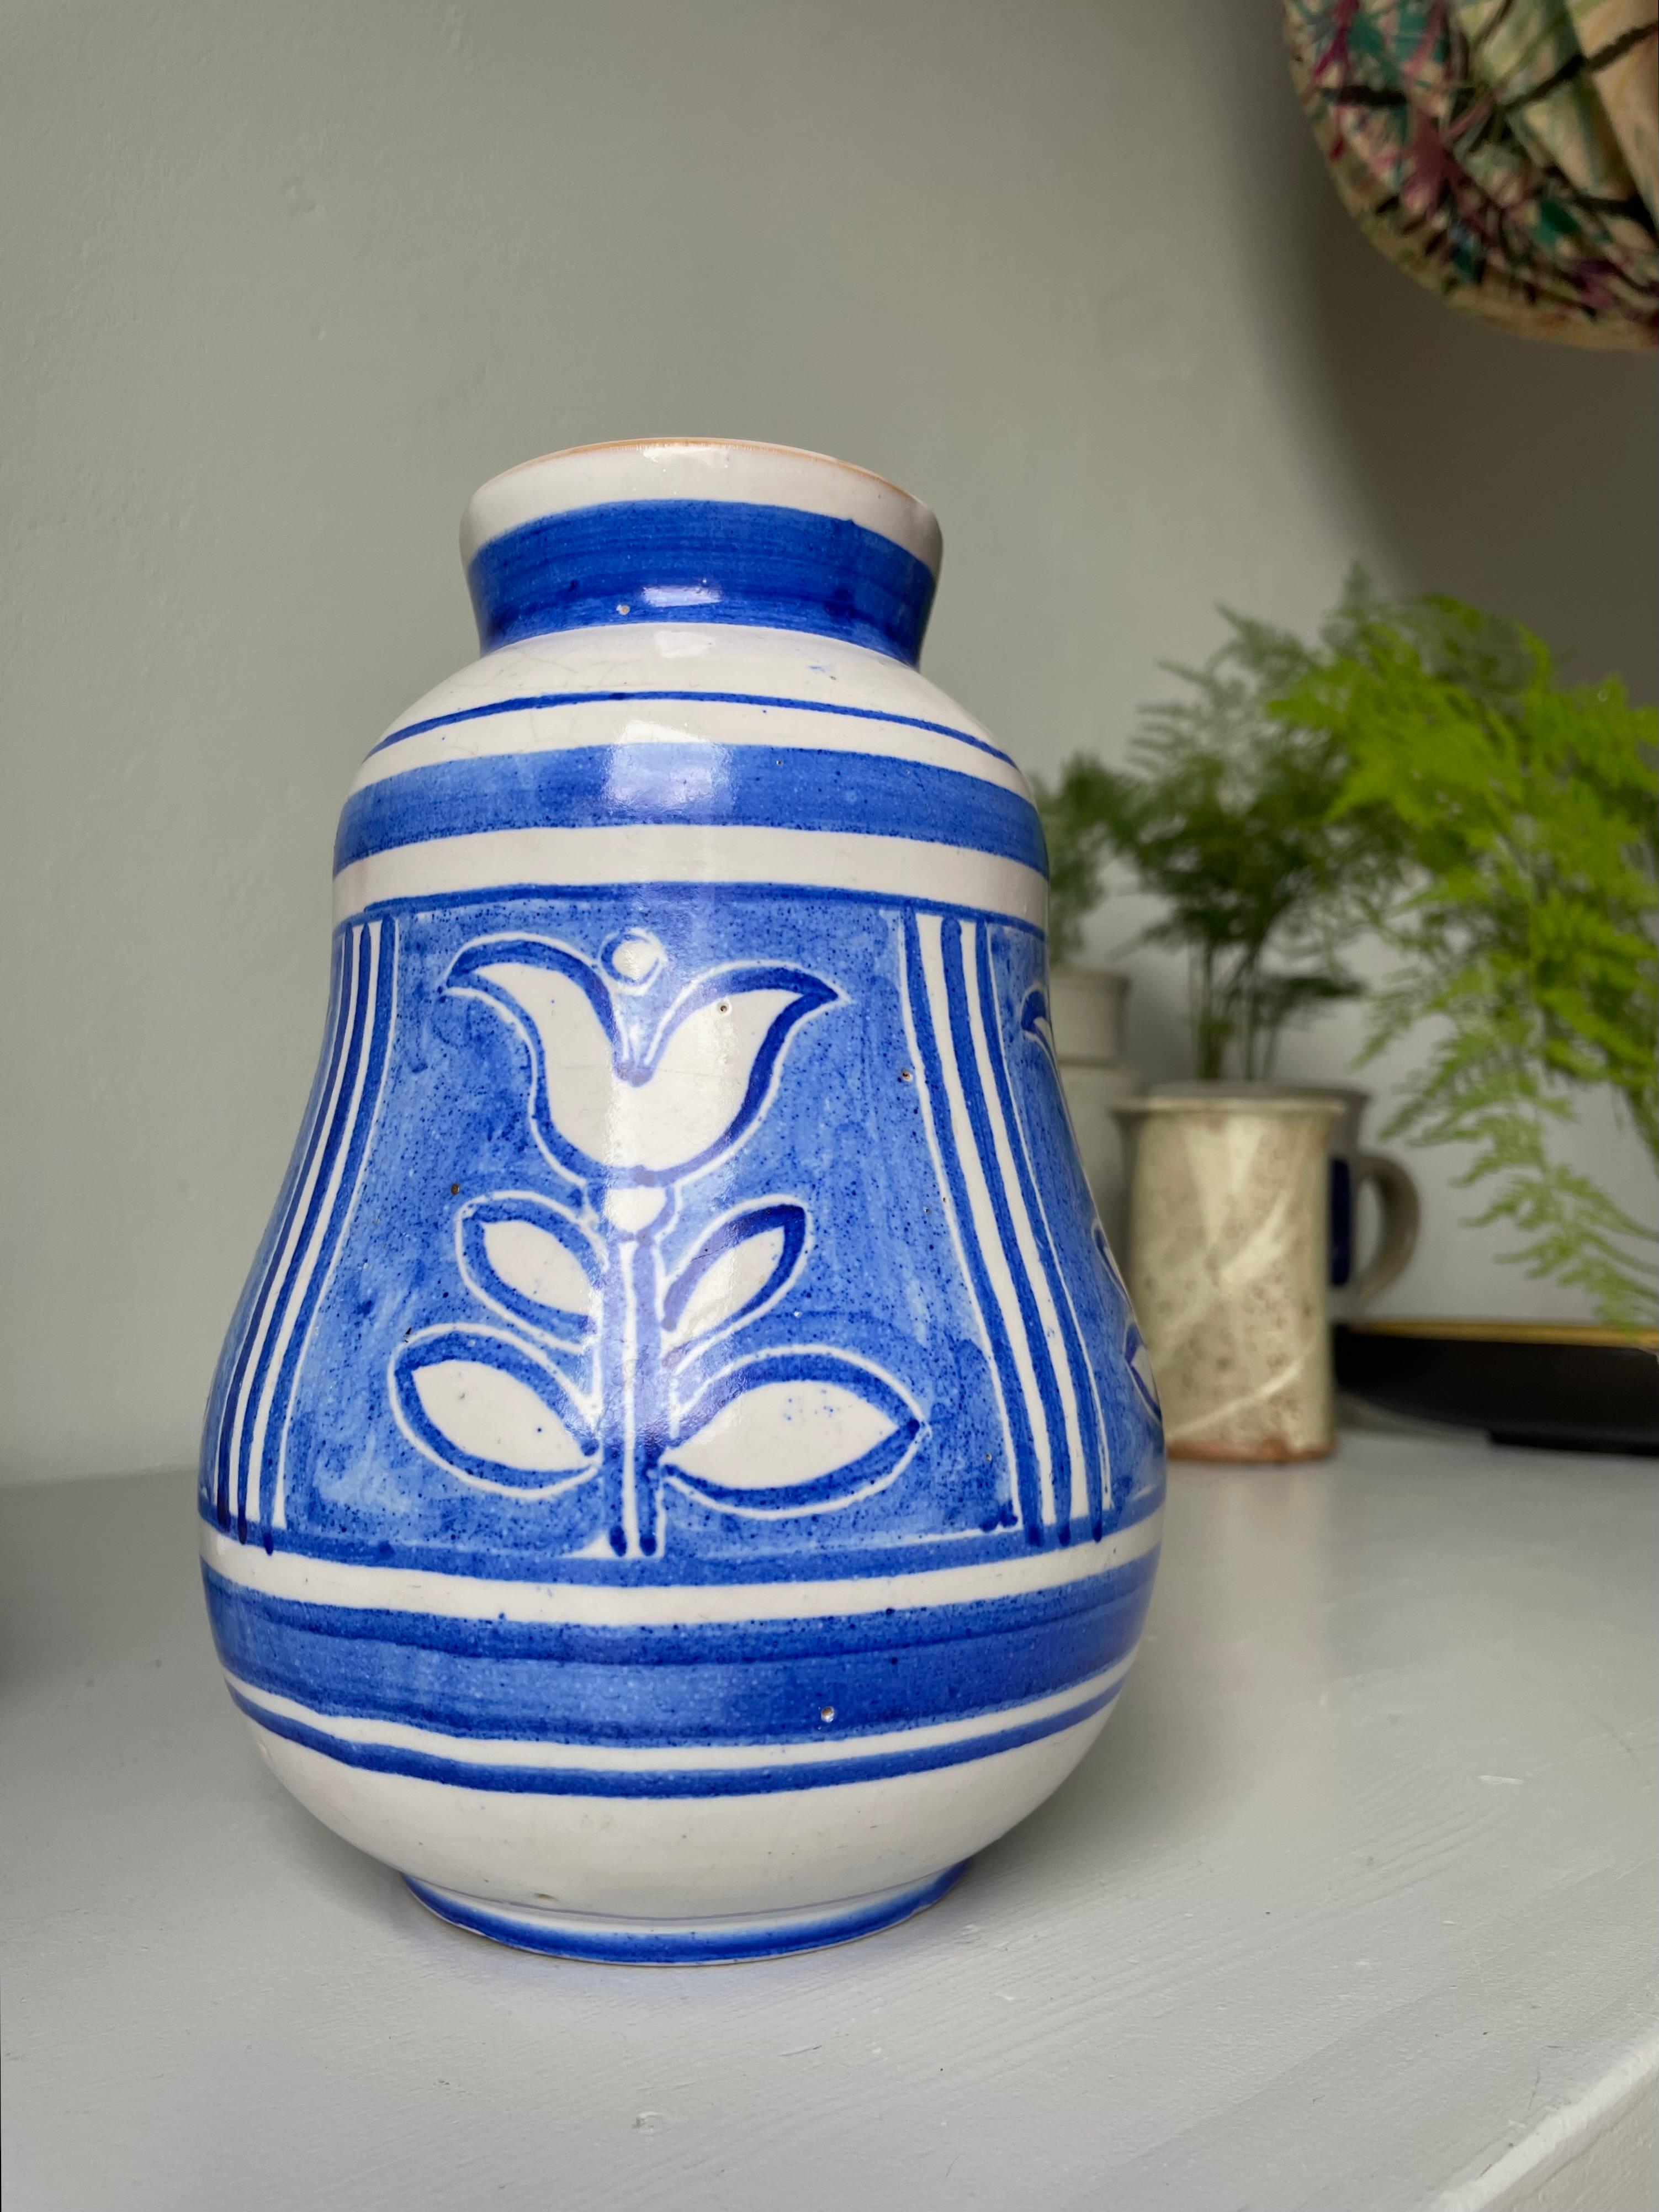 Nordic White Hand-Decorated Blue Floral Ceramic Vase, 1950s For Sale 1